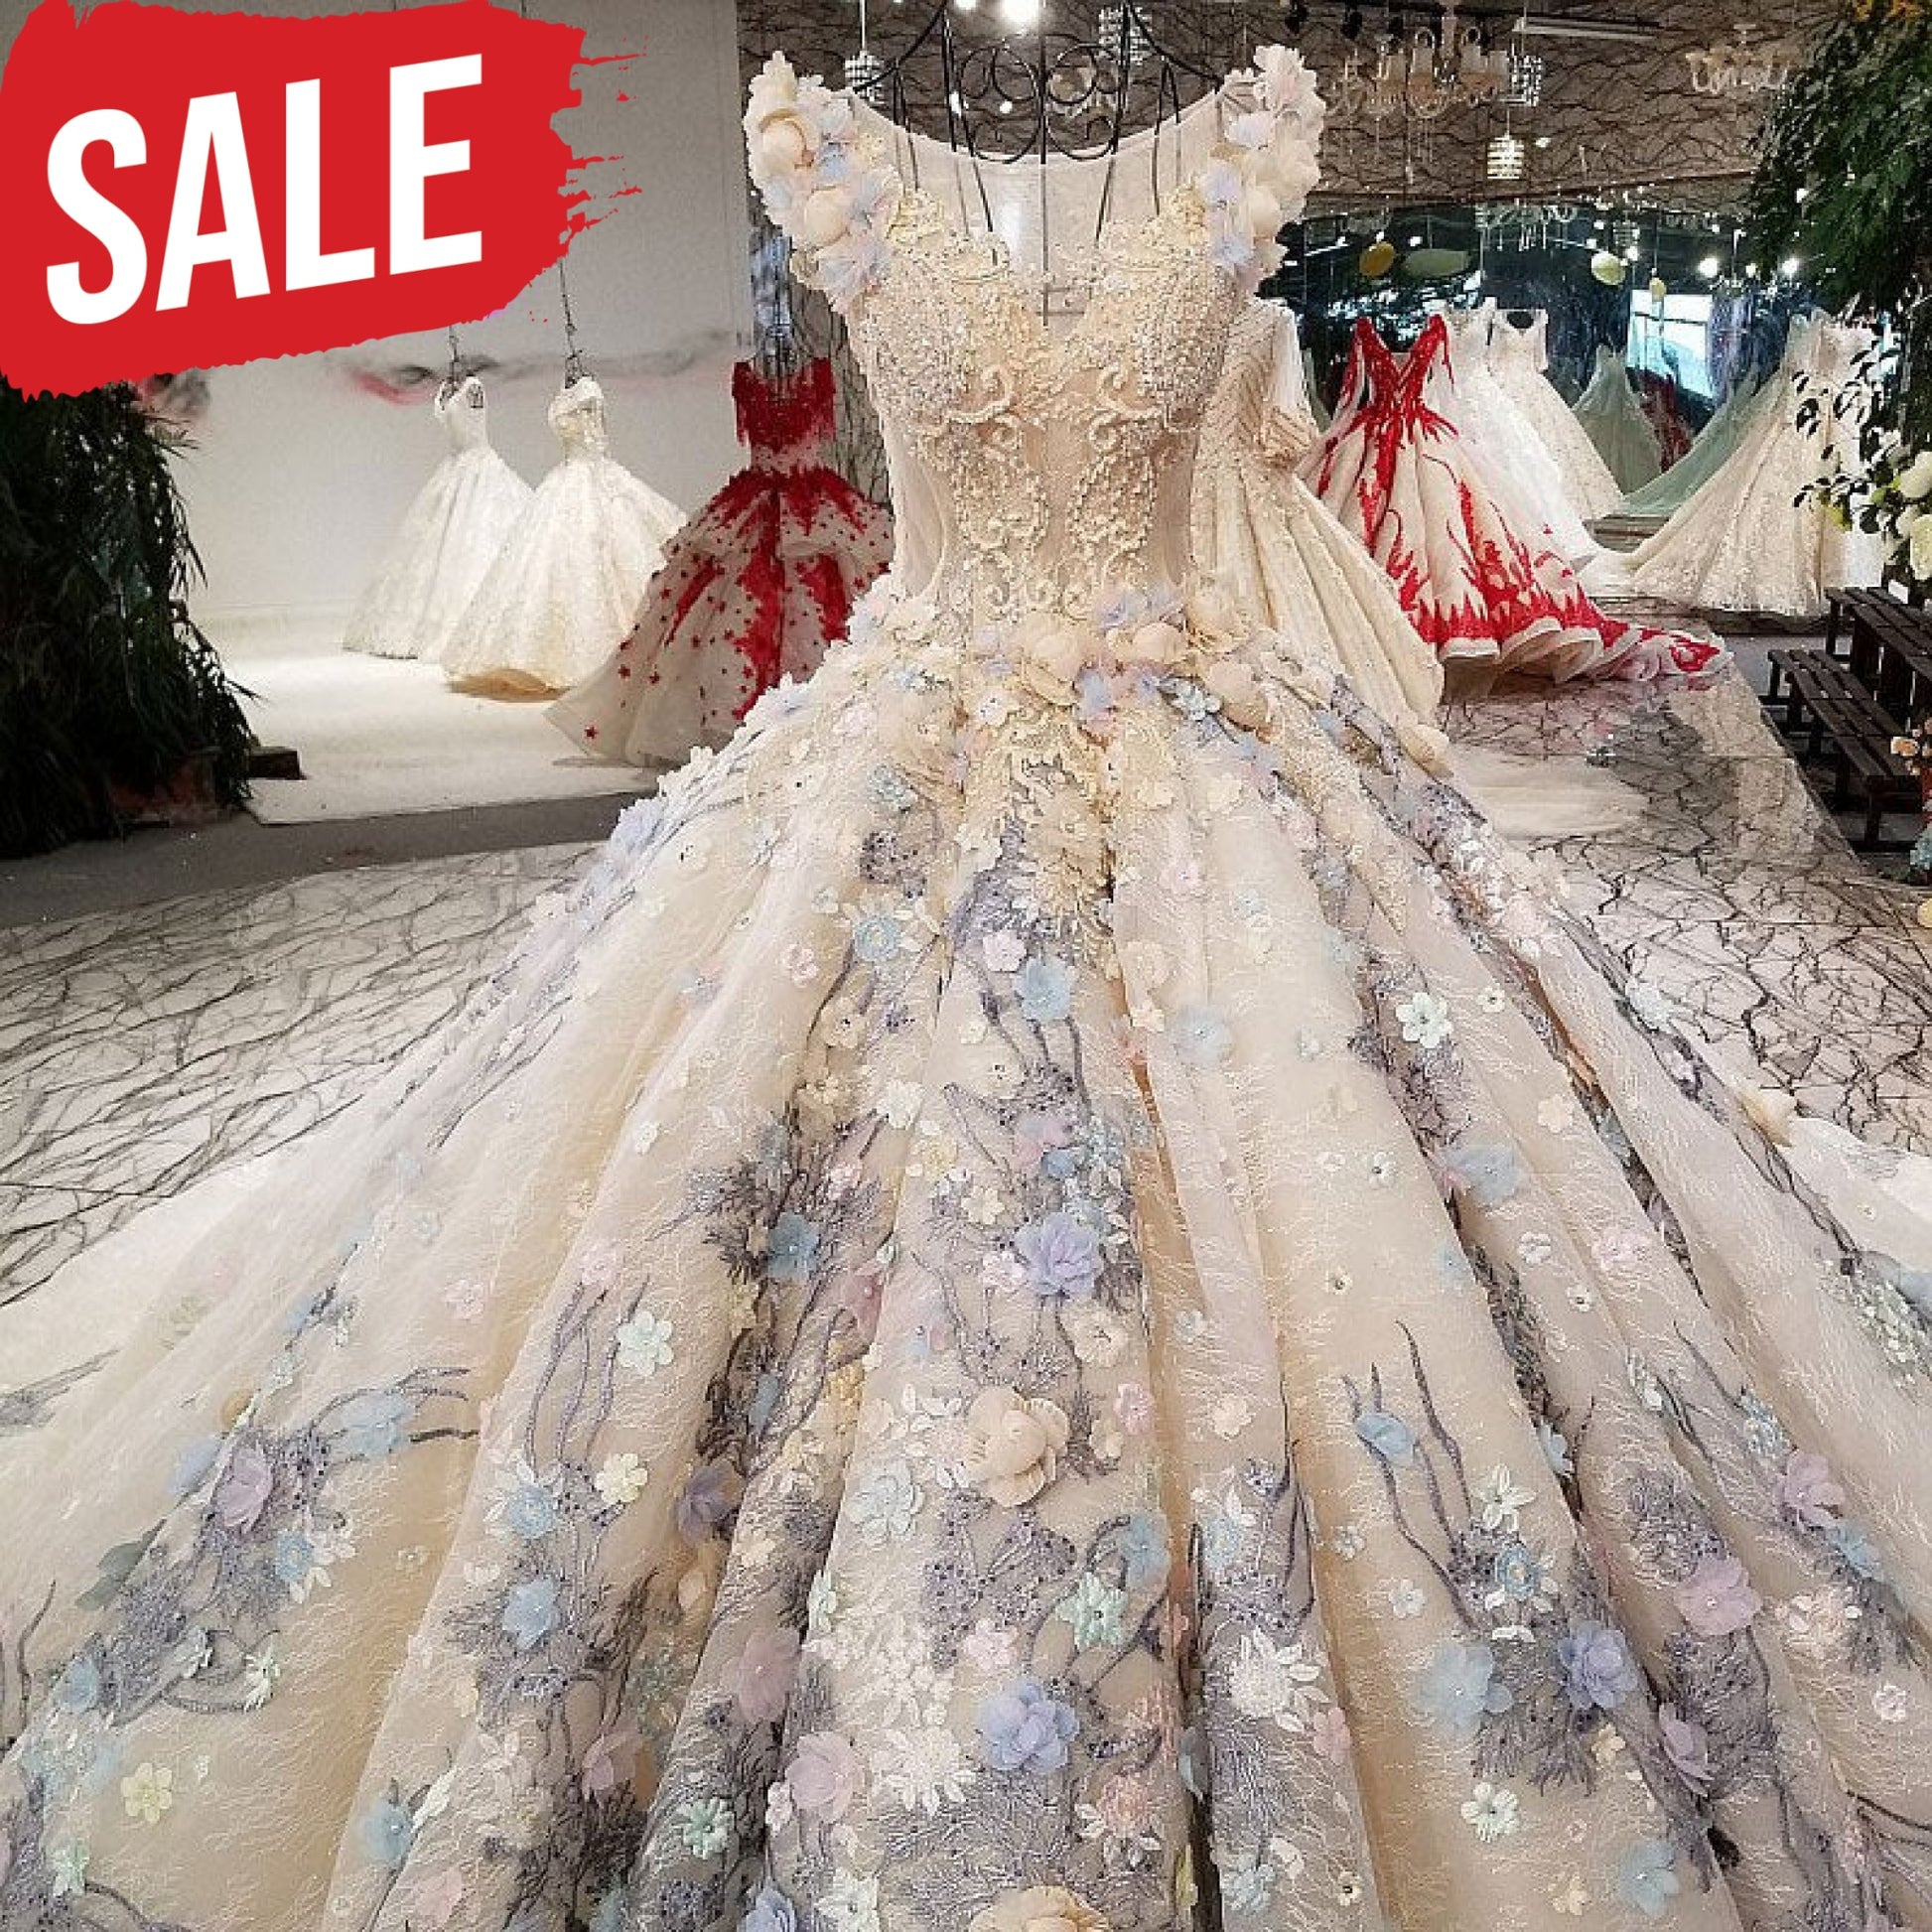 Real Couture Wedding Dress Real Couture Wedding Dress Real Couture Wedding Dress Real Couture Wedding Dress